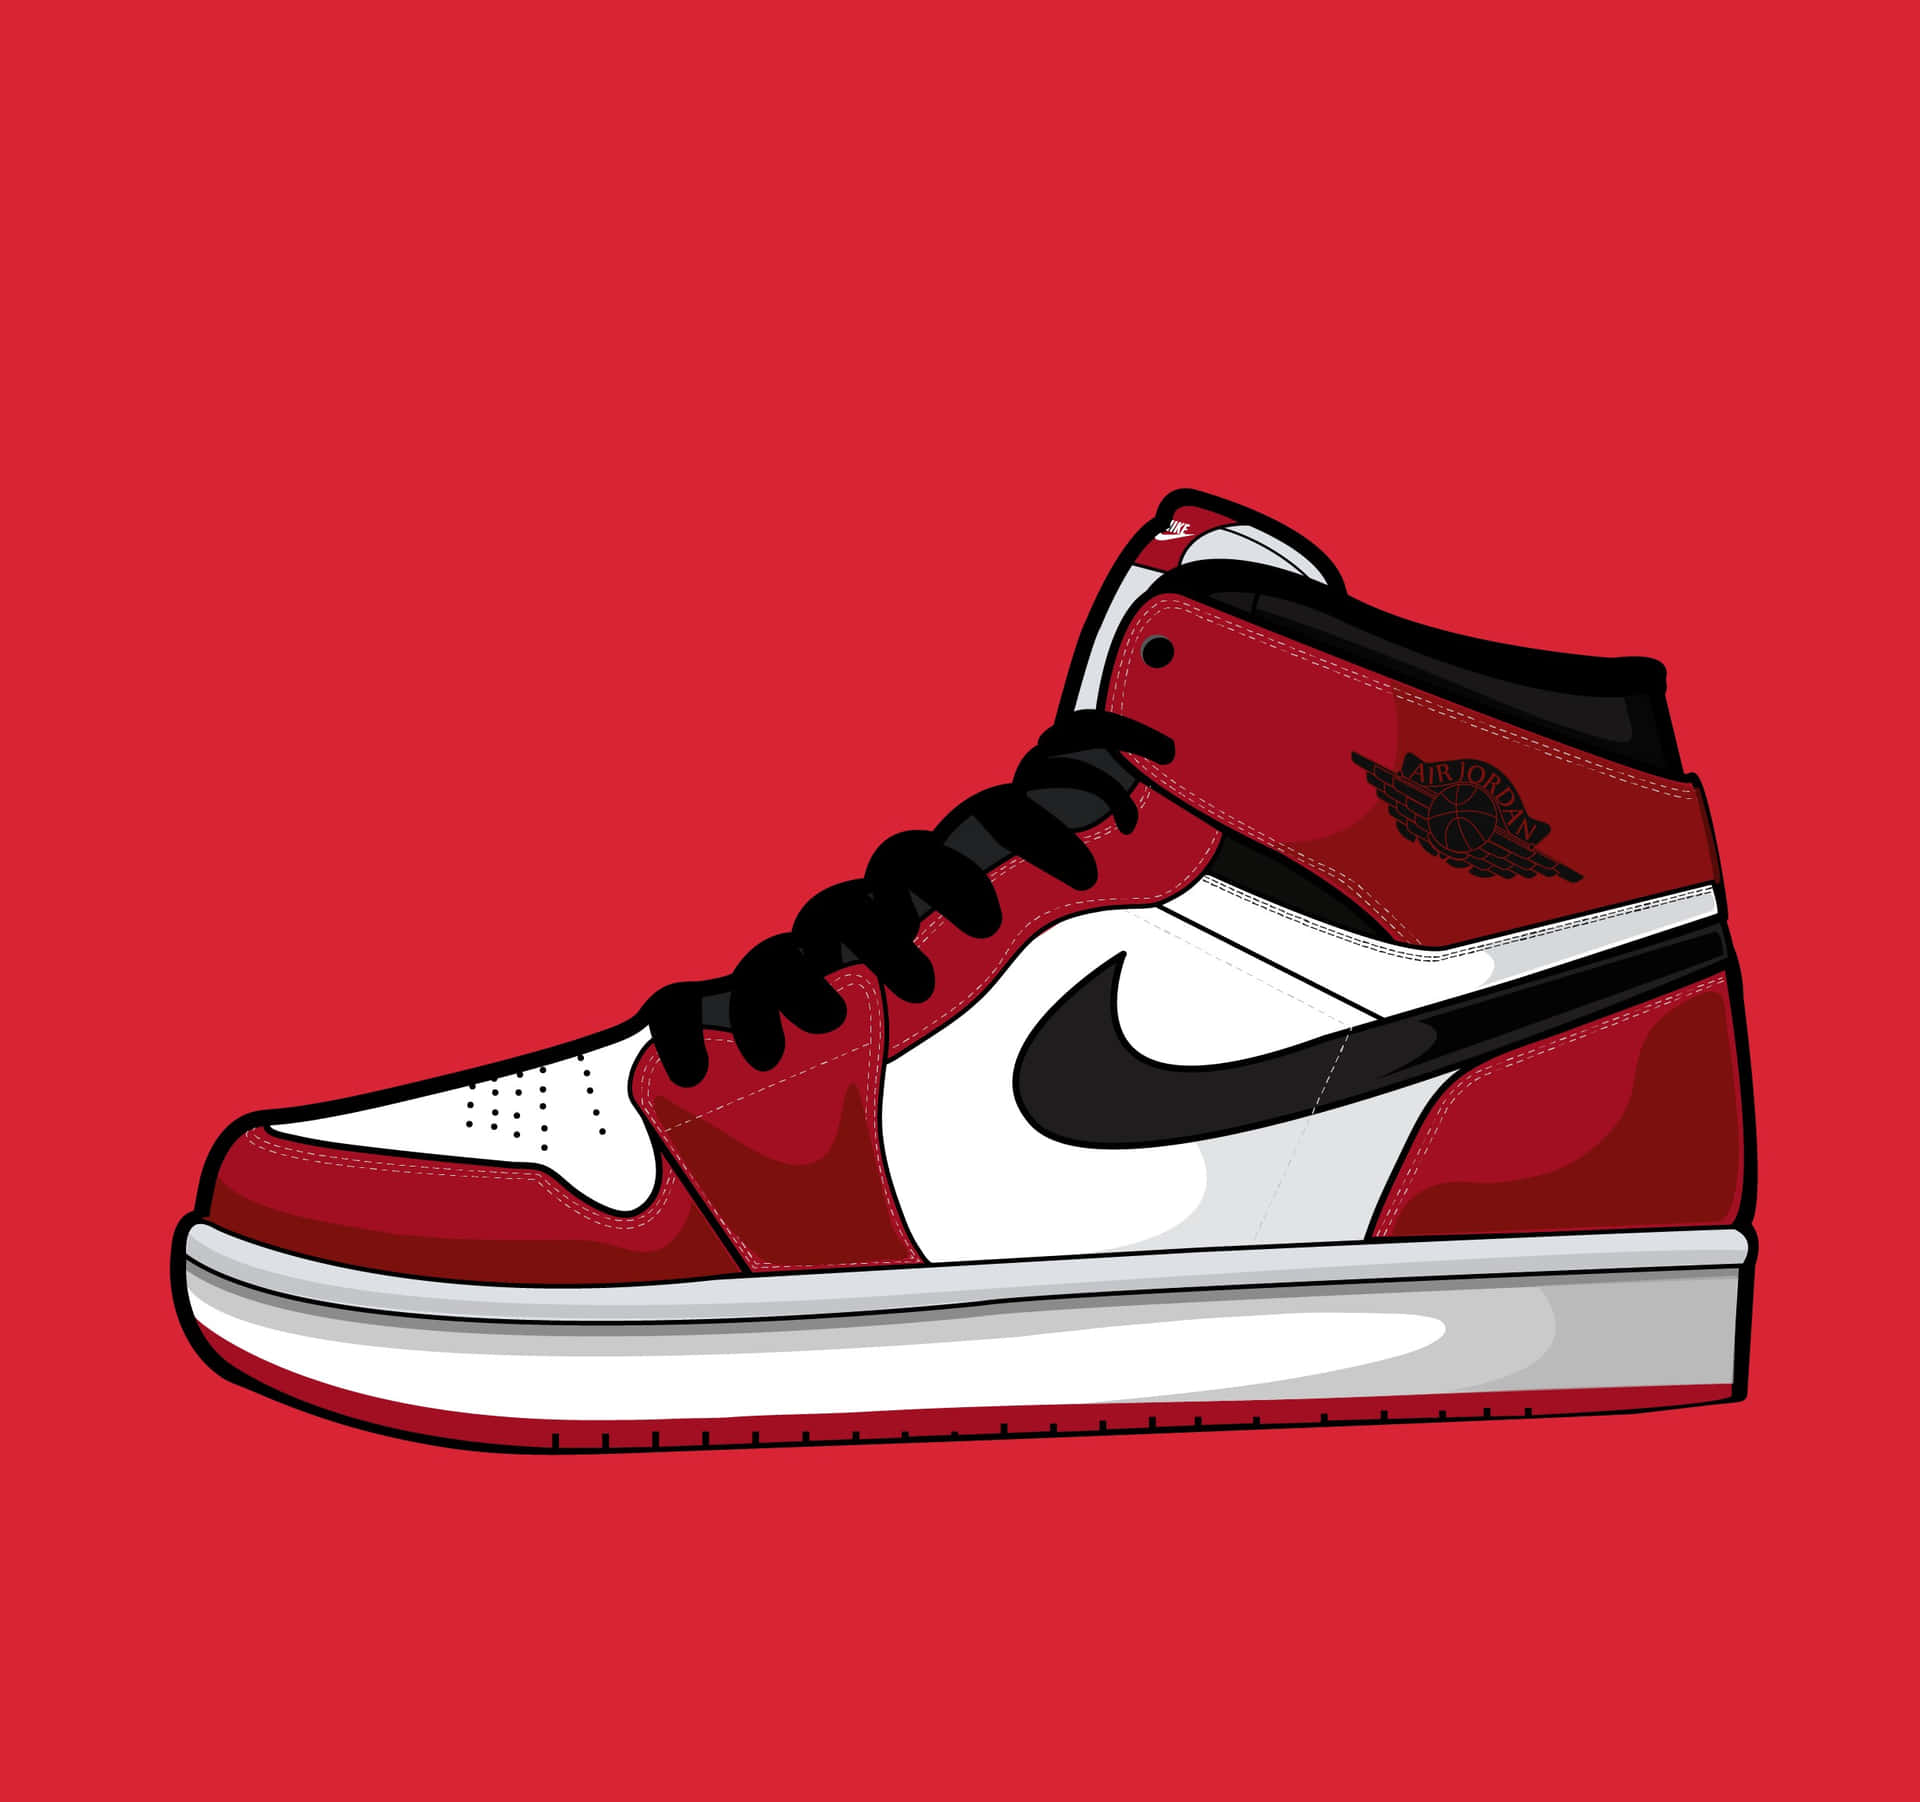 A Red And White Nike Air Jordan 1 On A Red Background Wallpaper